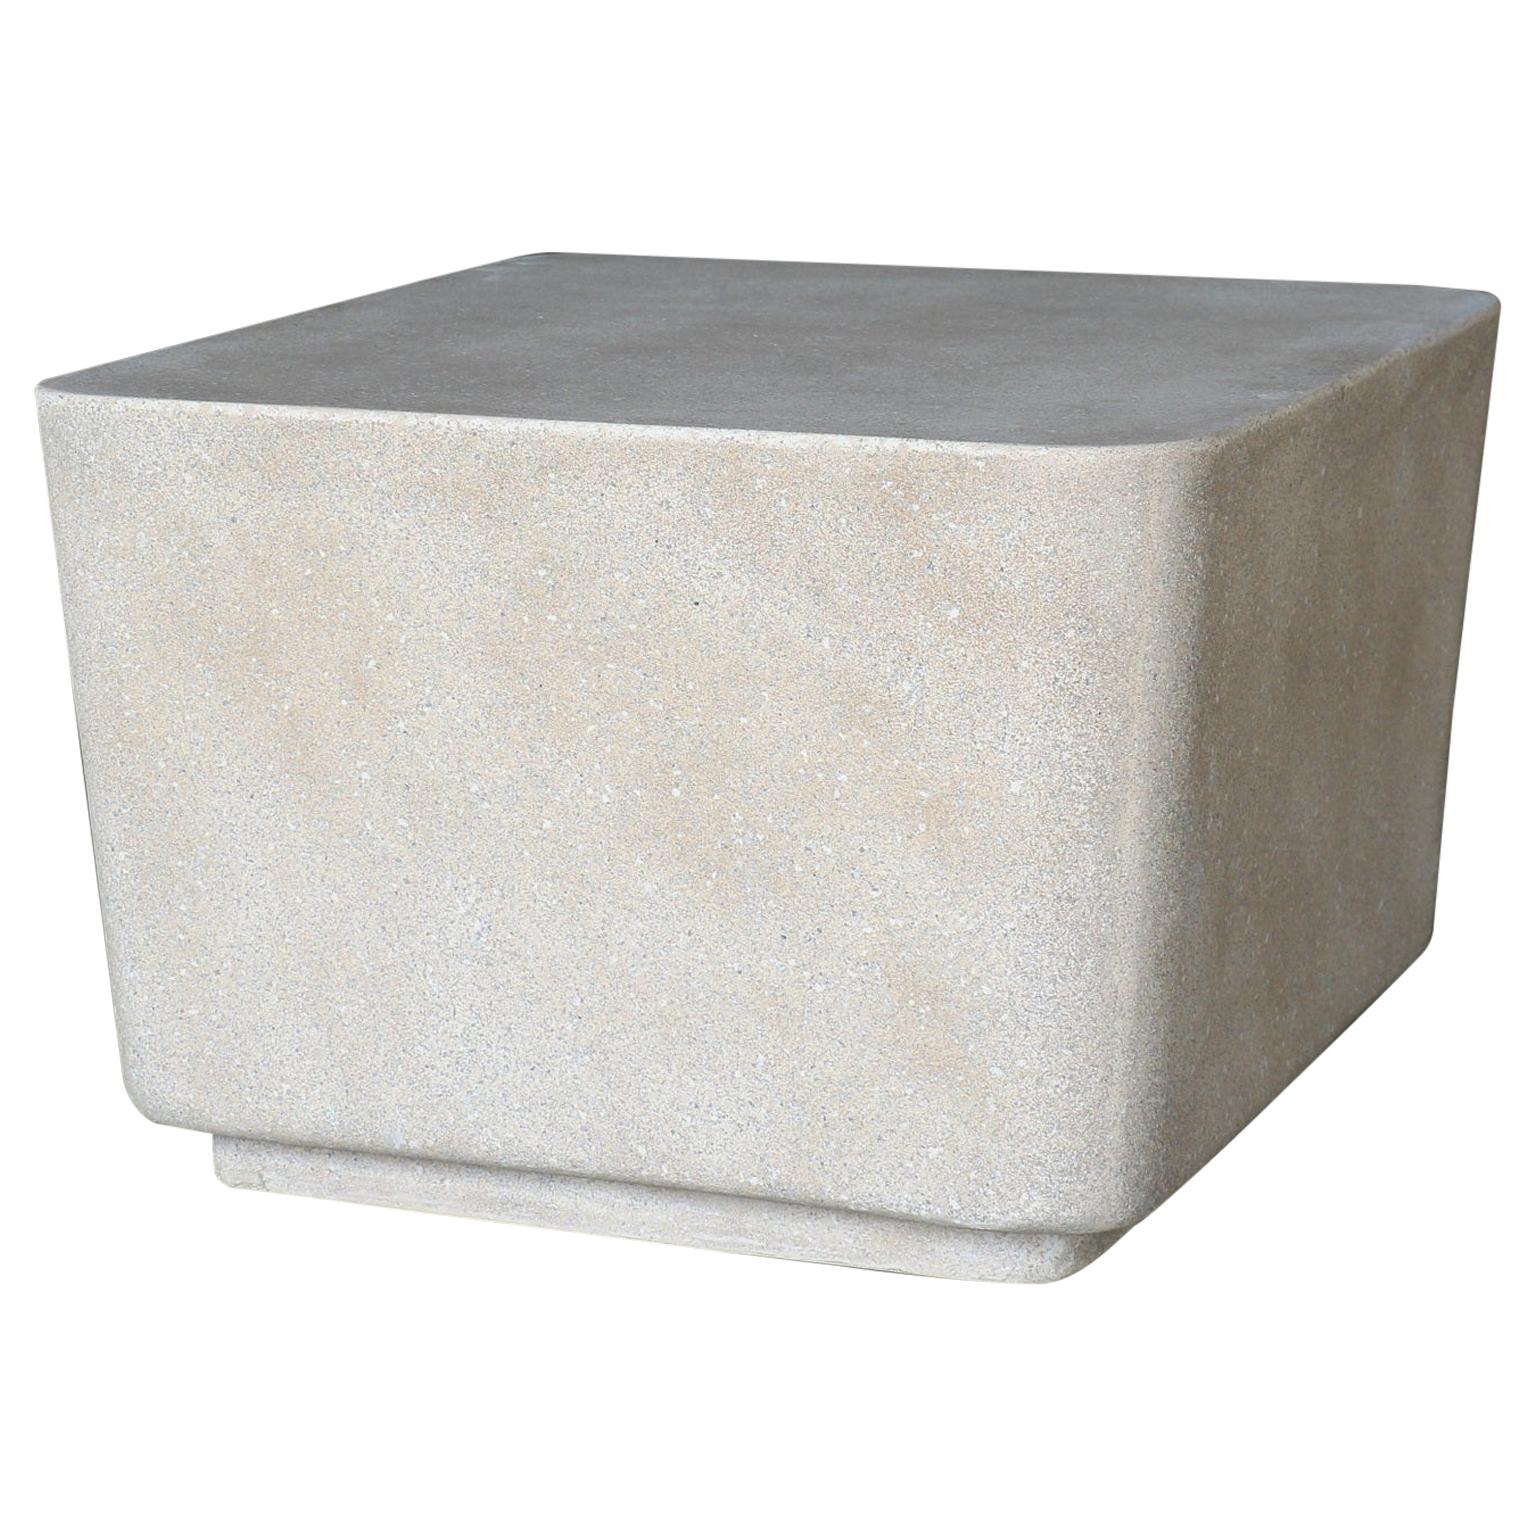 Cast Resin 'Block' Cocktail Table, Aged Stone Finish by Zachary A. Design For Sale